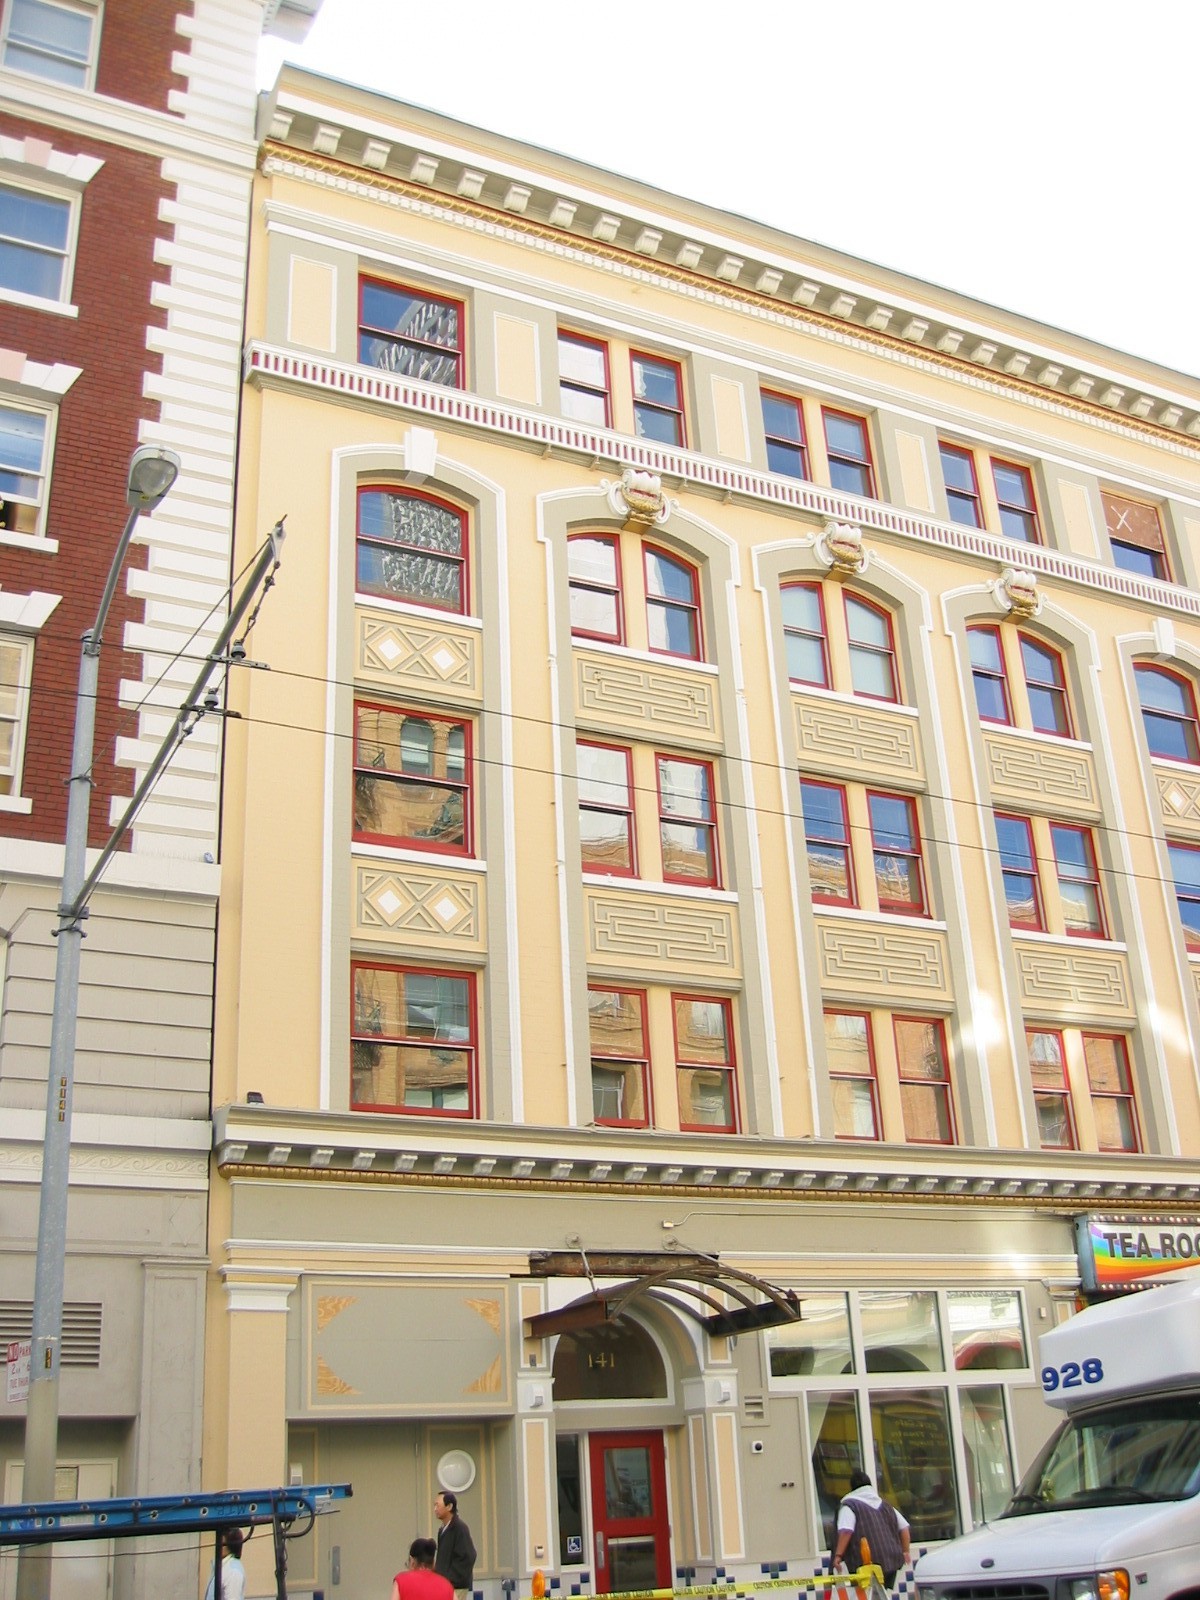 Cahill Contractors Affordable Housing Experience: West Hotel